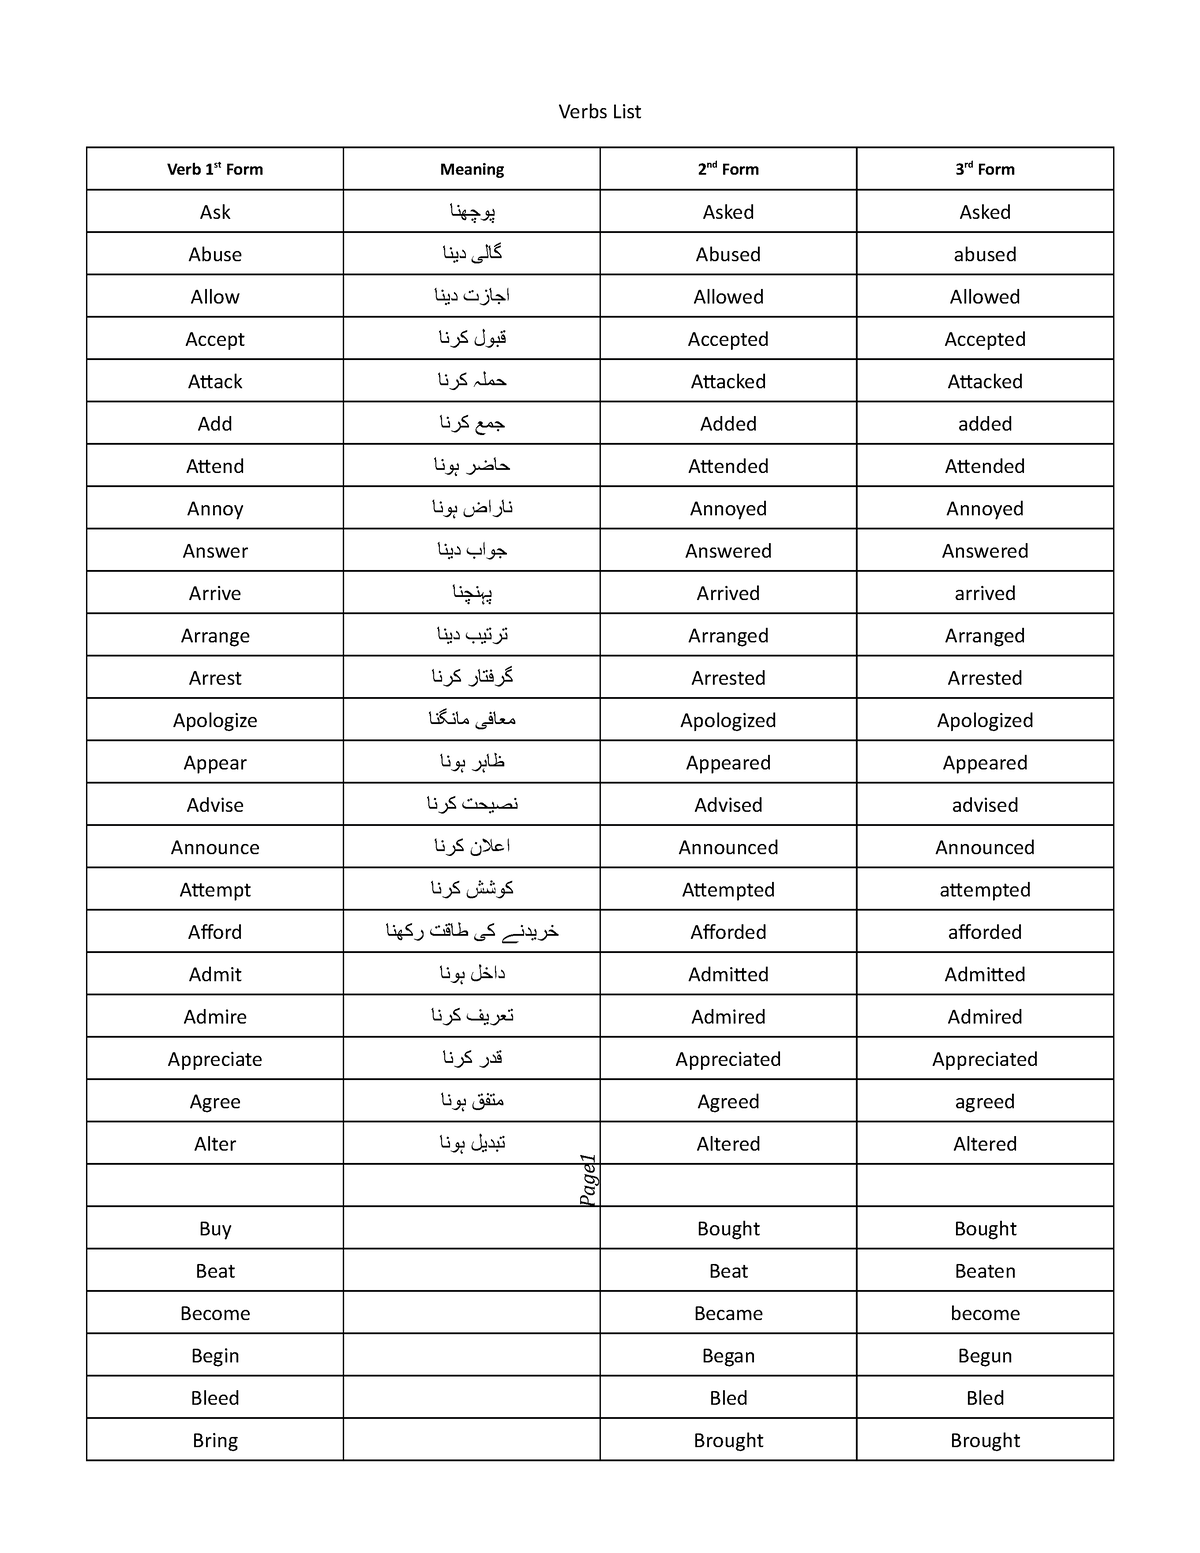 verbs-listhammad-page-verbs-list-verb-1st-form-meaning-2-nd-form-3-rd